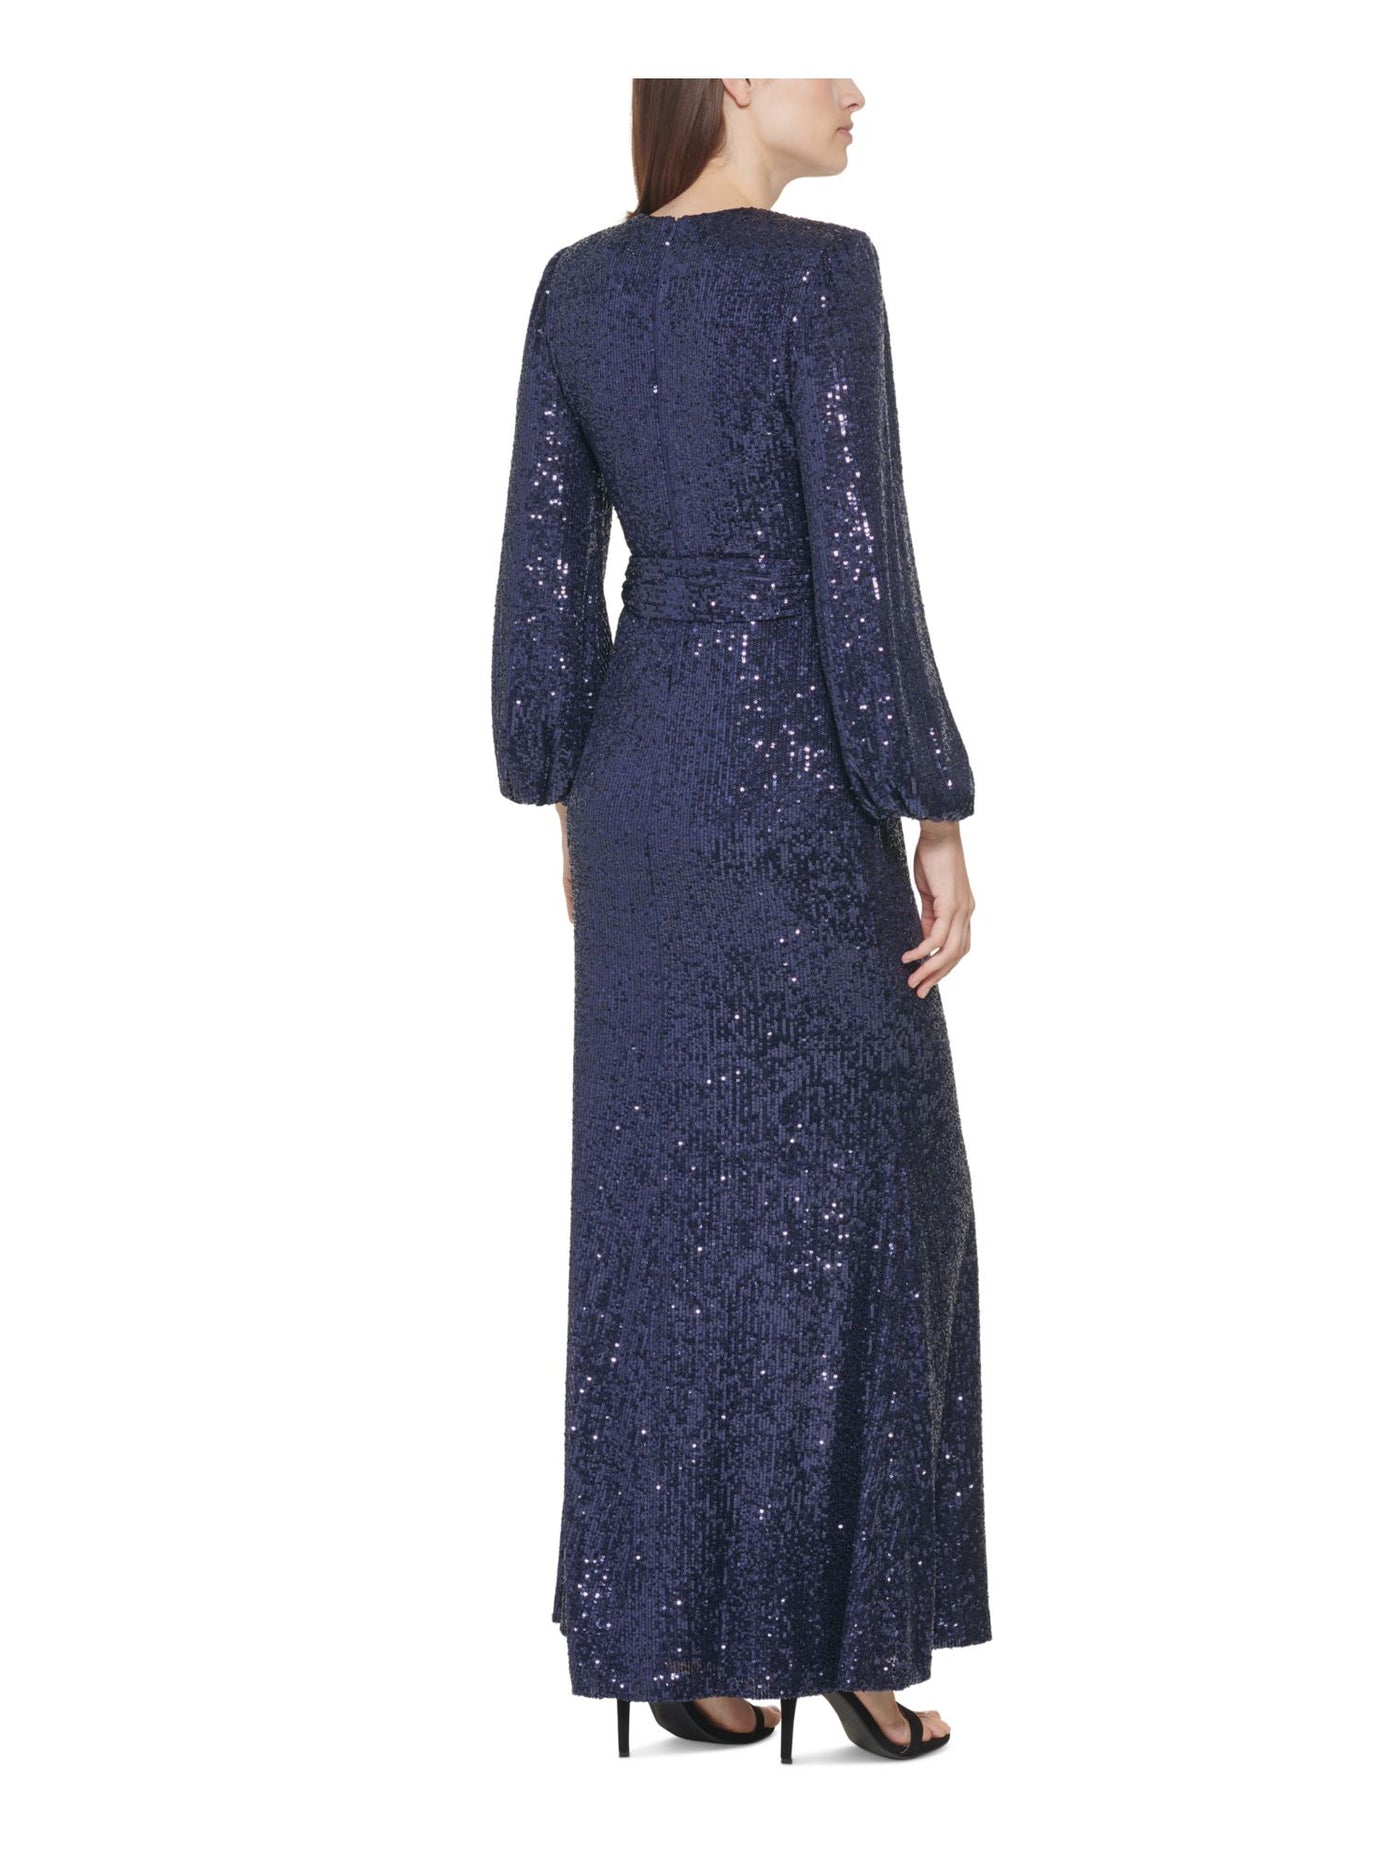 VINCE CAMUTO Womens Navy Sequined Zippered Shoulder Pads Blouson Sleeve V Neck Full-Length Evening Gown Dress Petites 2